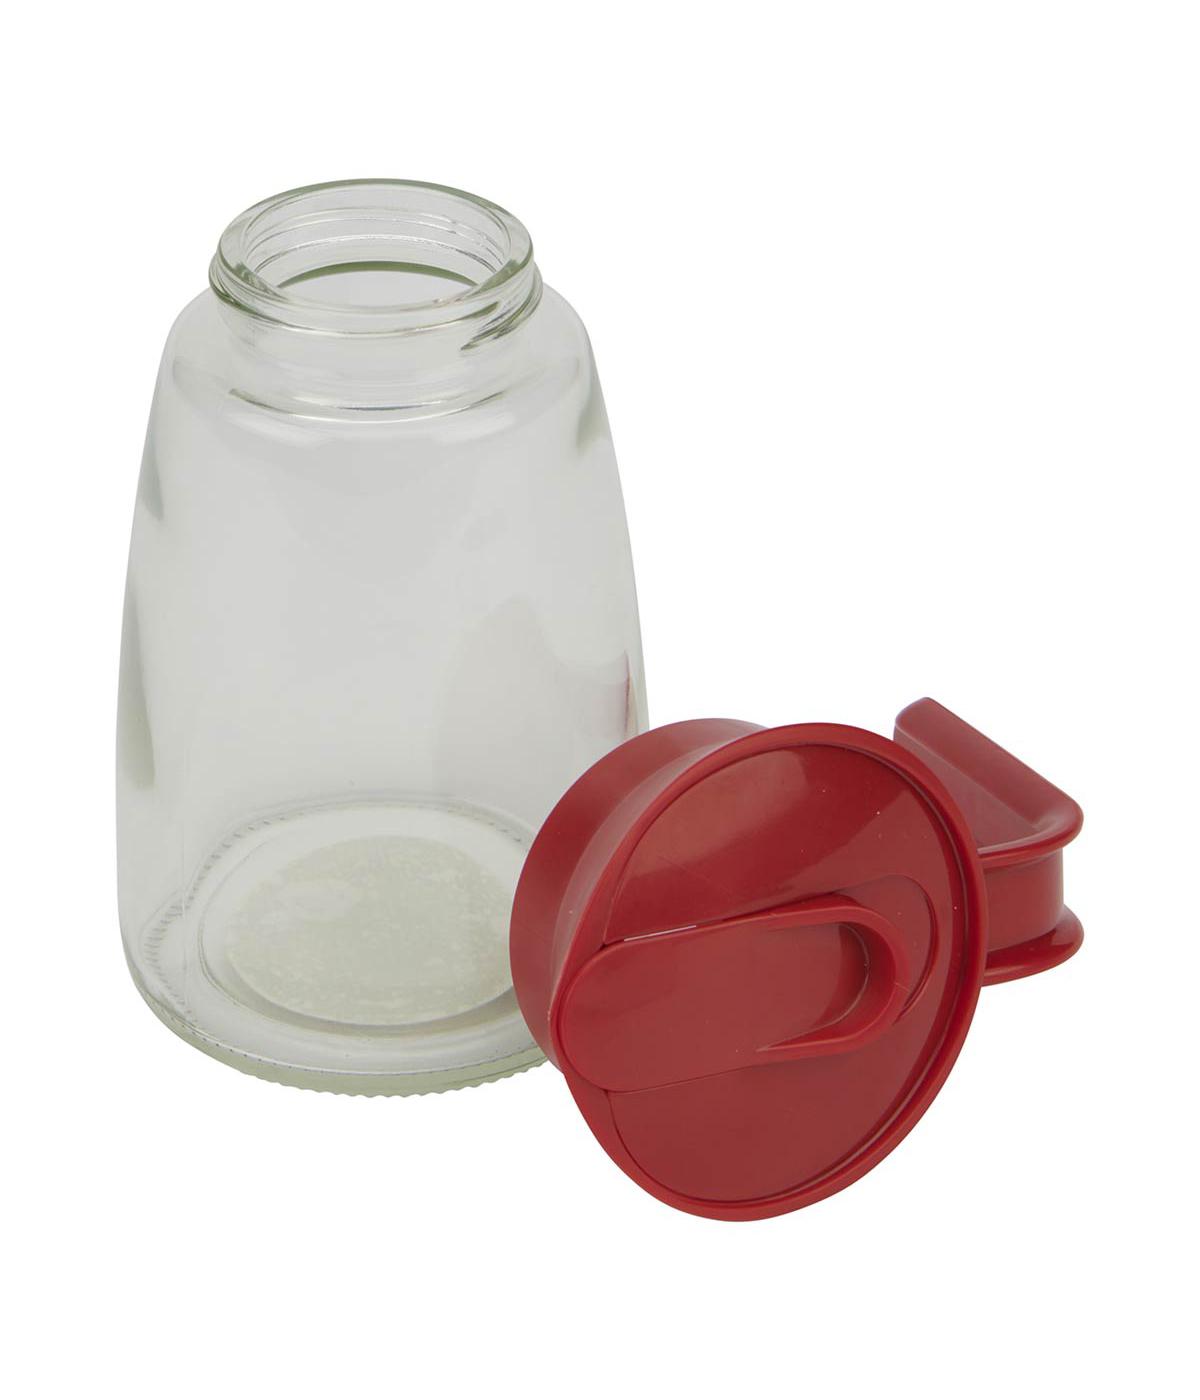 GoodCook Everyday Syrup Dispenser; image 3 of 3